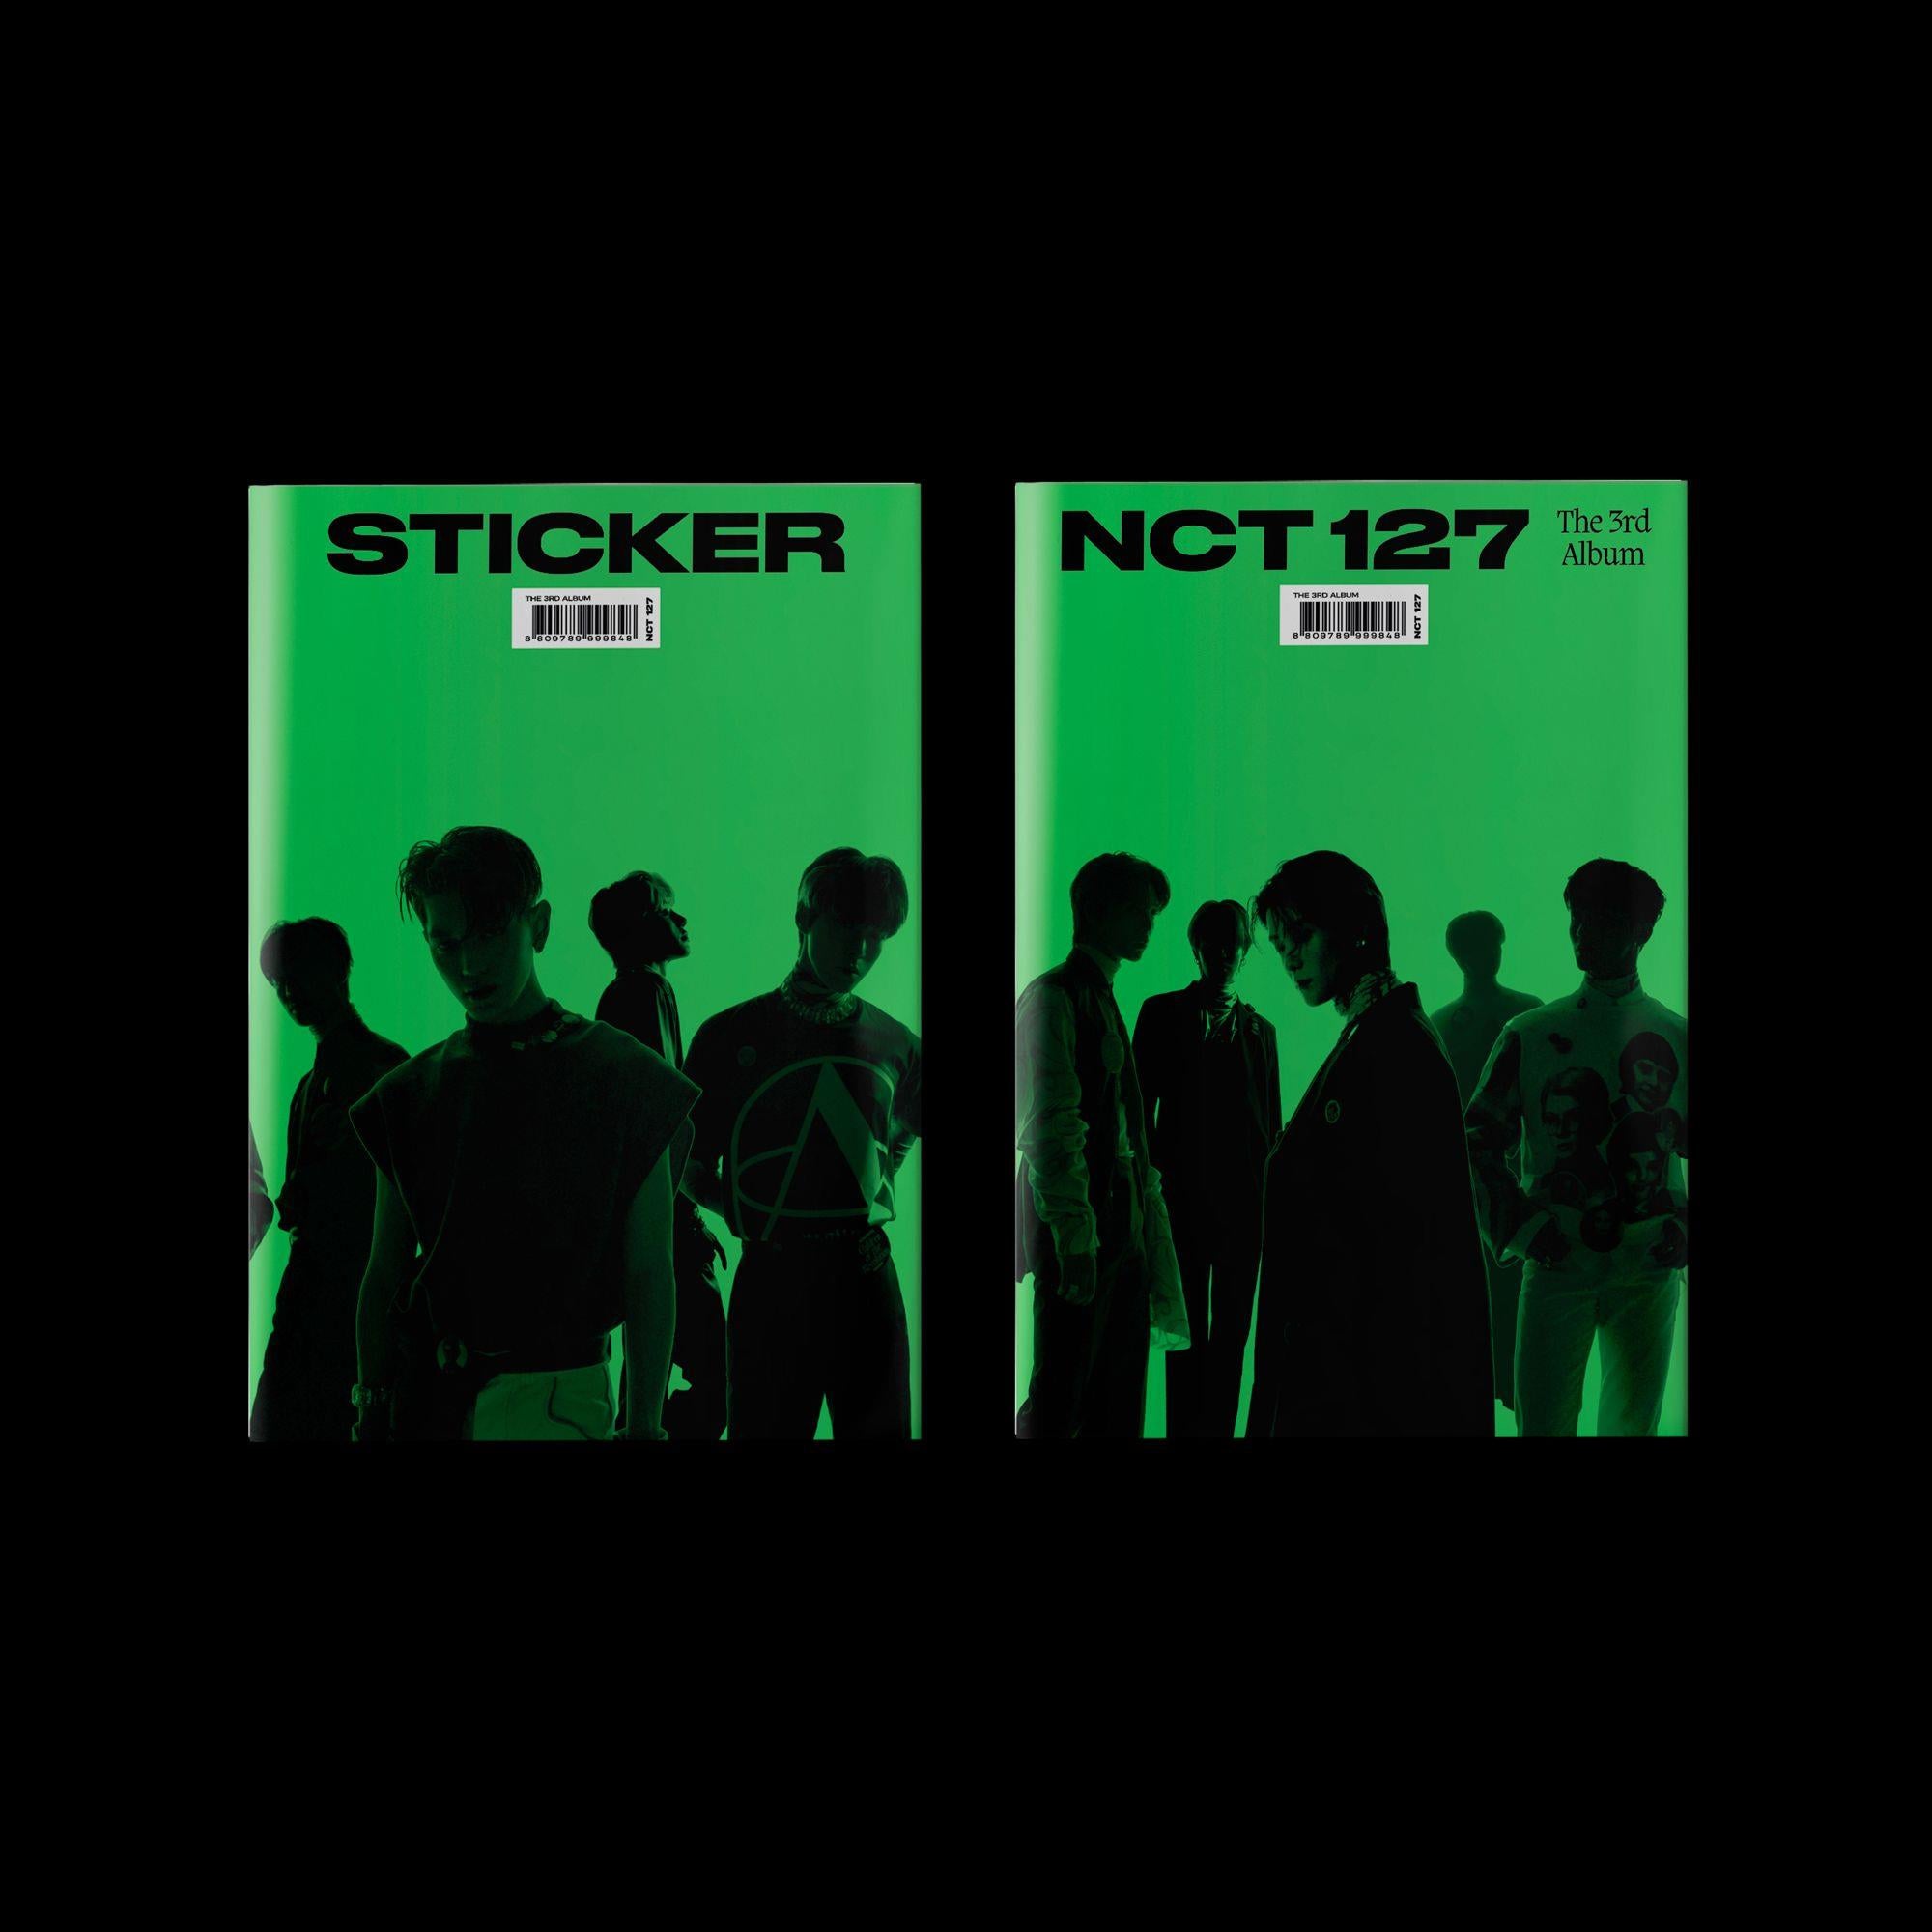 How to Get the FREE Sticker Dance Move - NCT 127 Emote